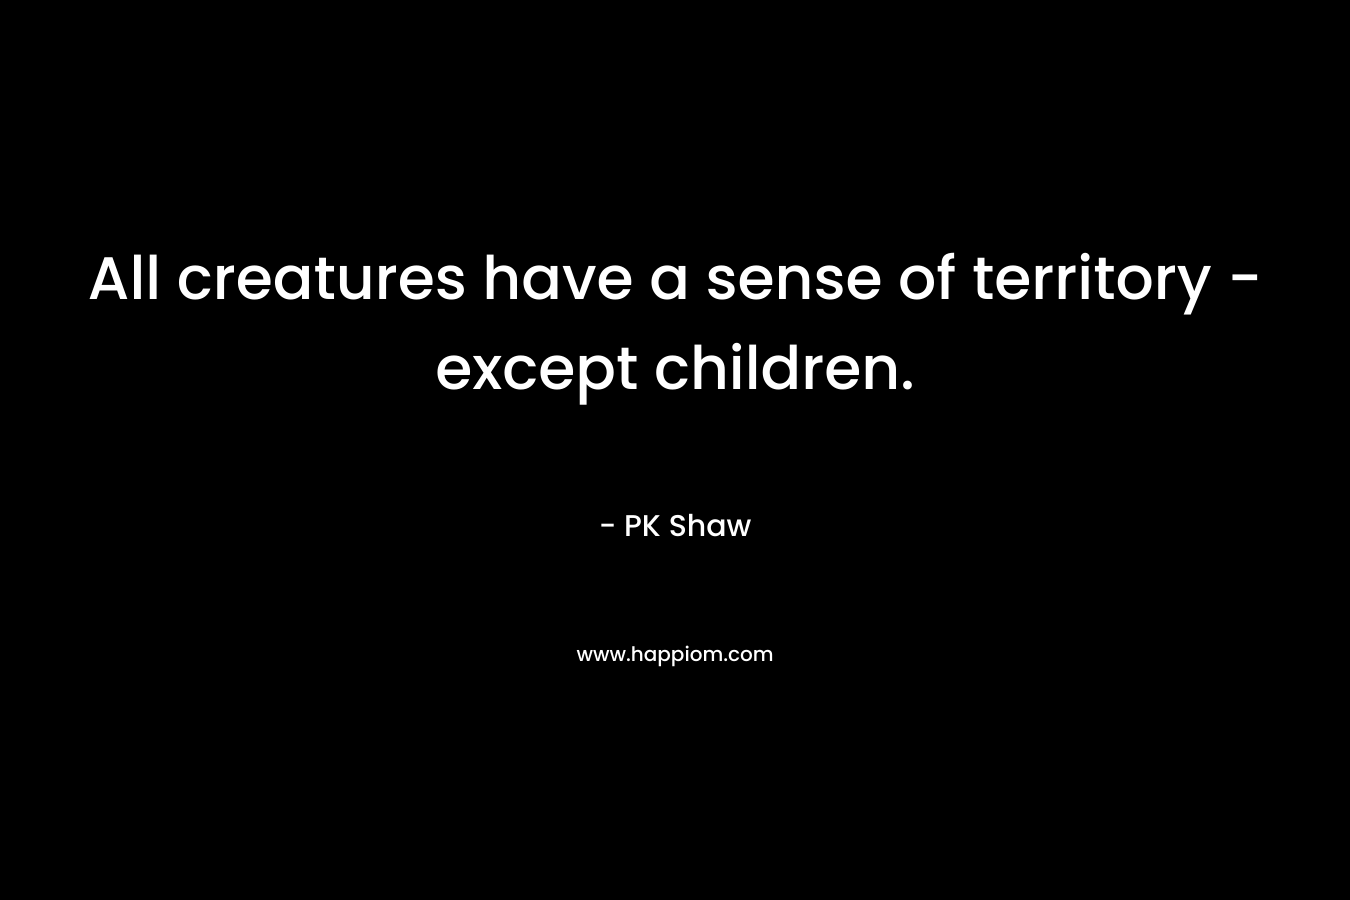 All creatures have a sense of territory - except children.